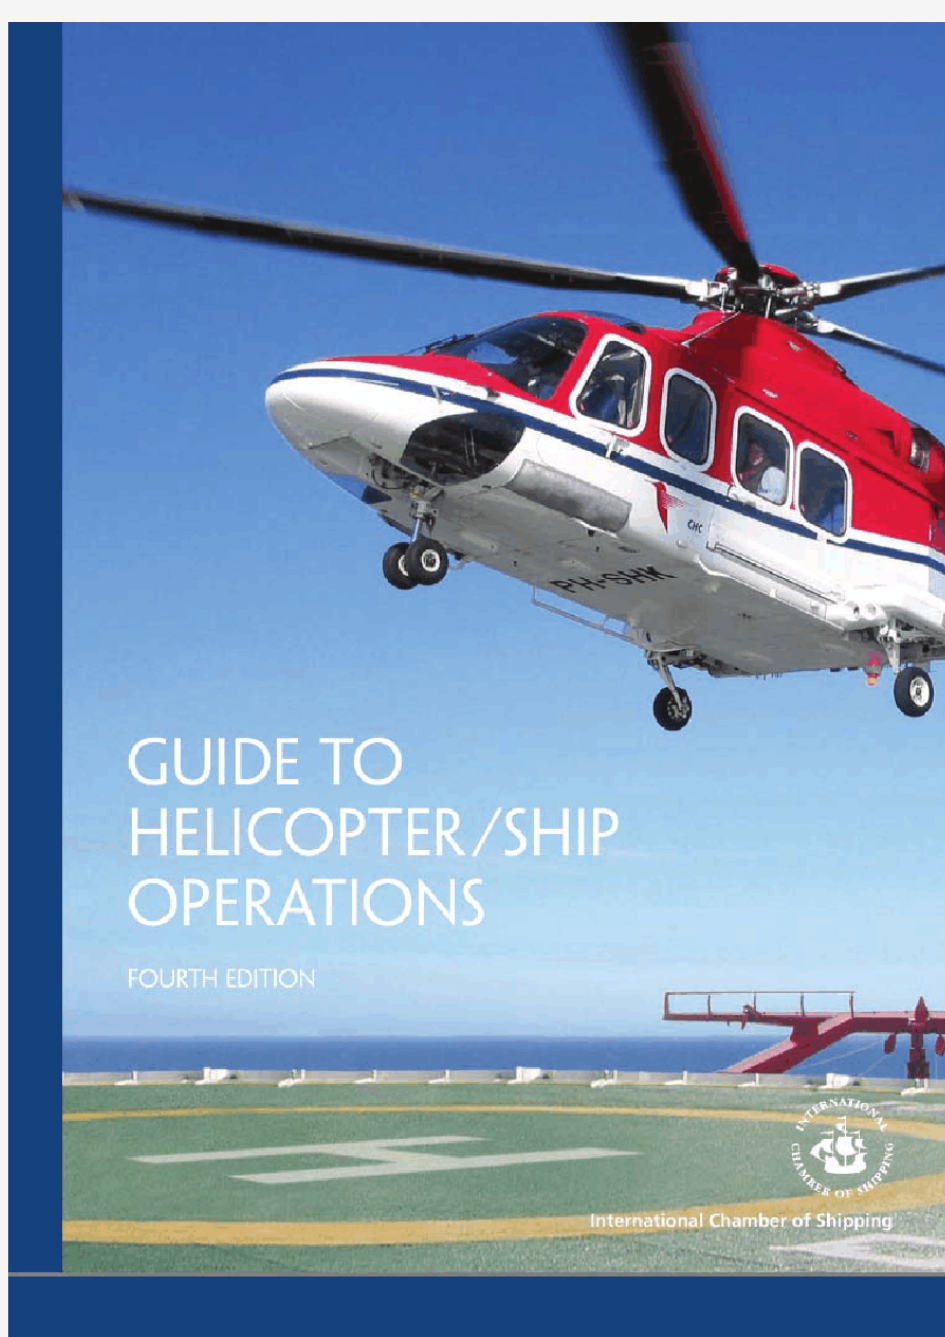 ICS GUIDE TO HELICOPTER-SHIP OPERATION 4TH EDITION